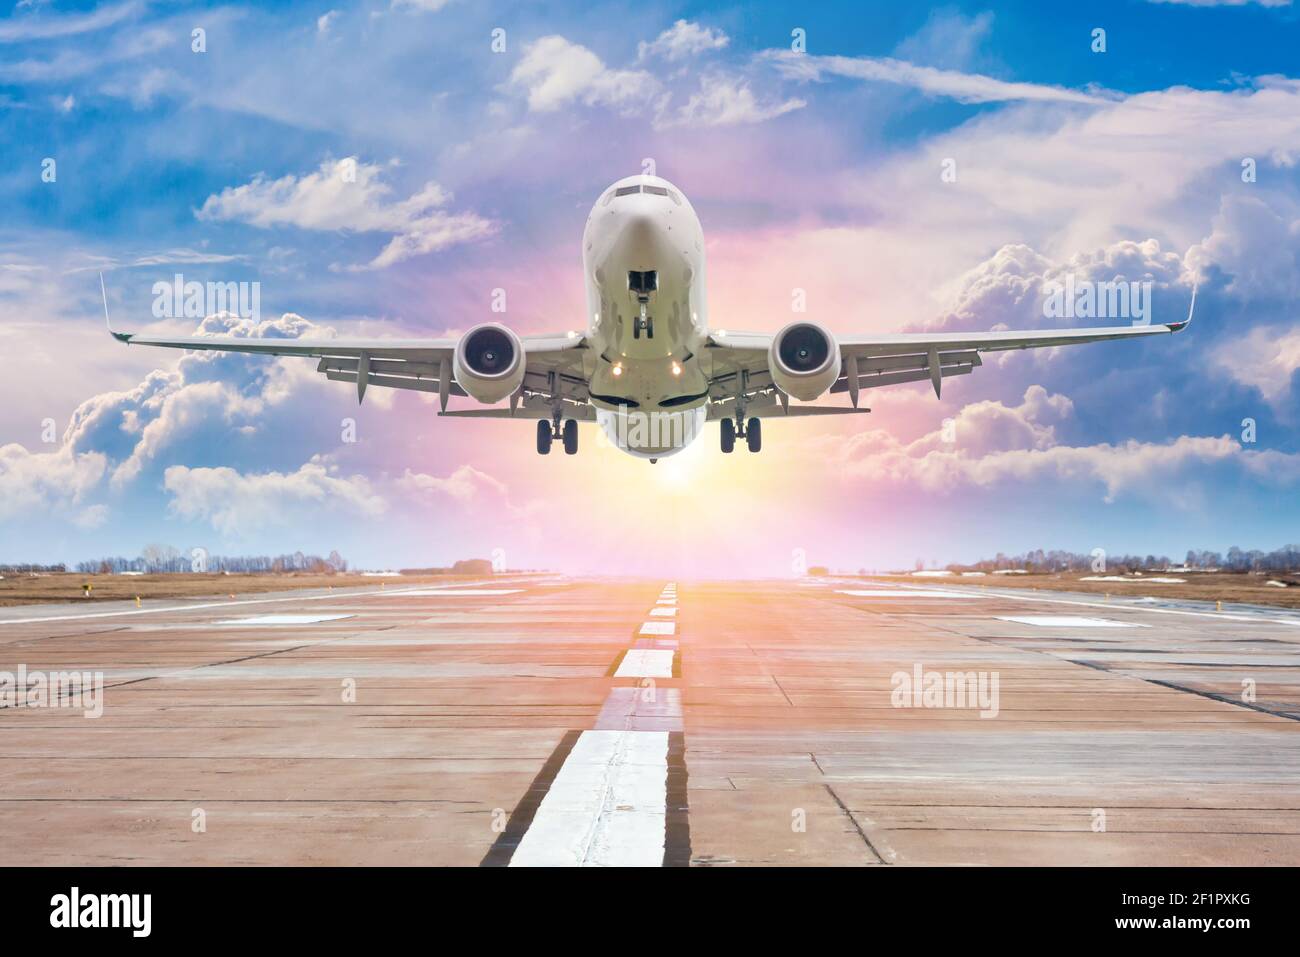 White passenger airplane take off from airport runway against the backdrop of a picturesque evening sky with sun rays Stock Photo